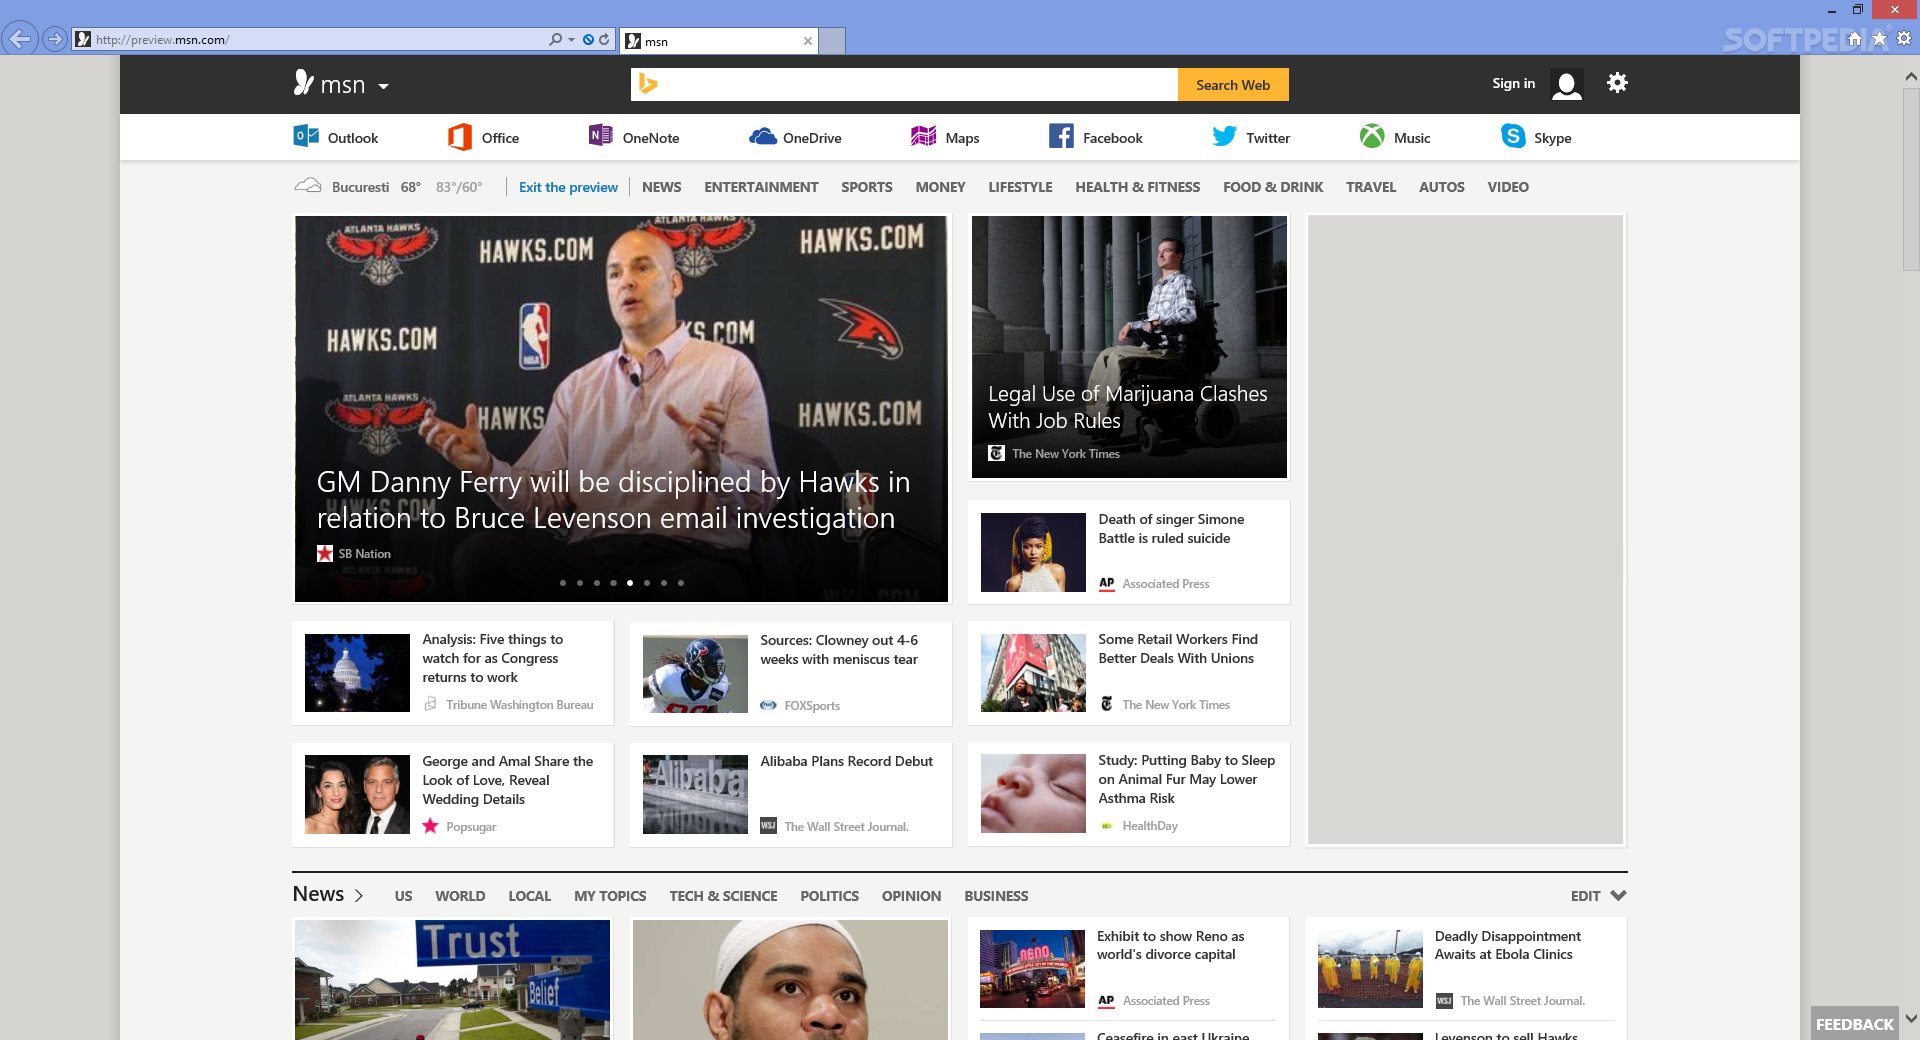 Microsoft Launches Completely Redesigned MSN Portal - Softpedia